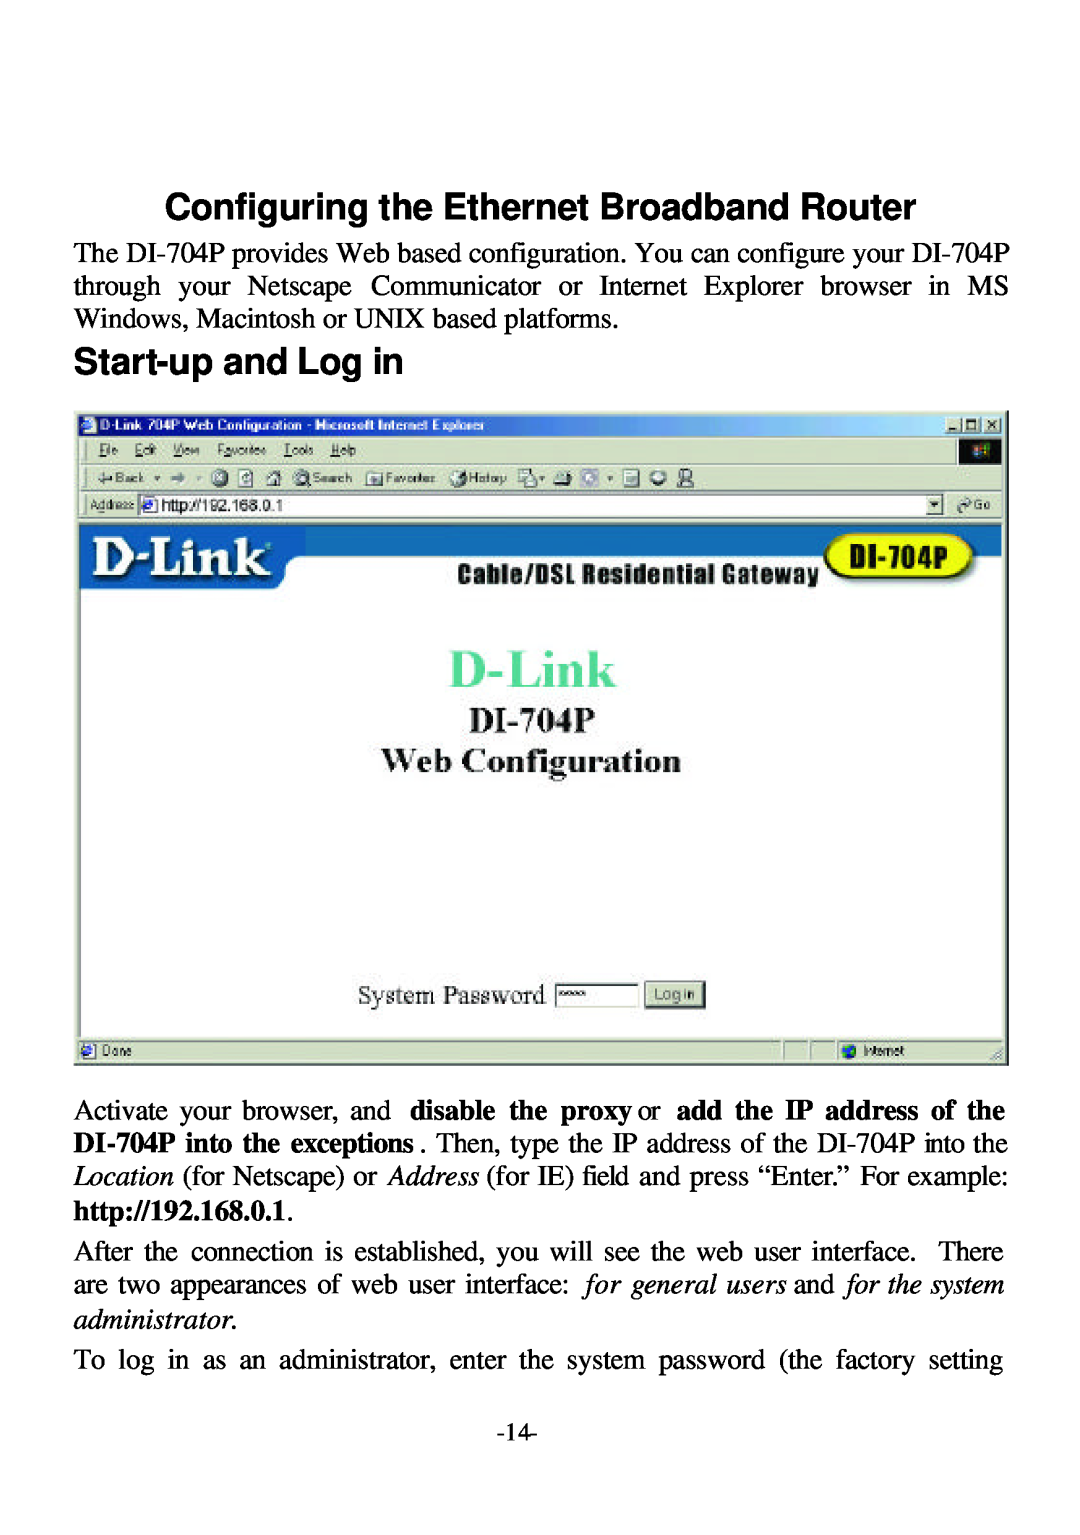 D-Link DI-704P user manual Configuring the Ethernet Broadband Router, Start-up and Log in 